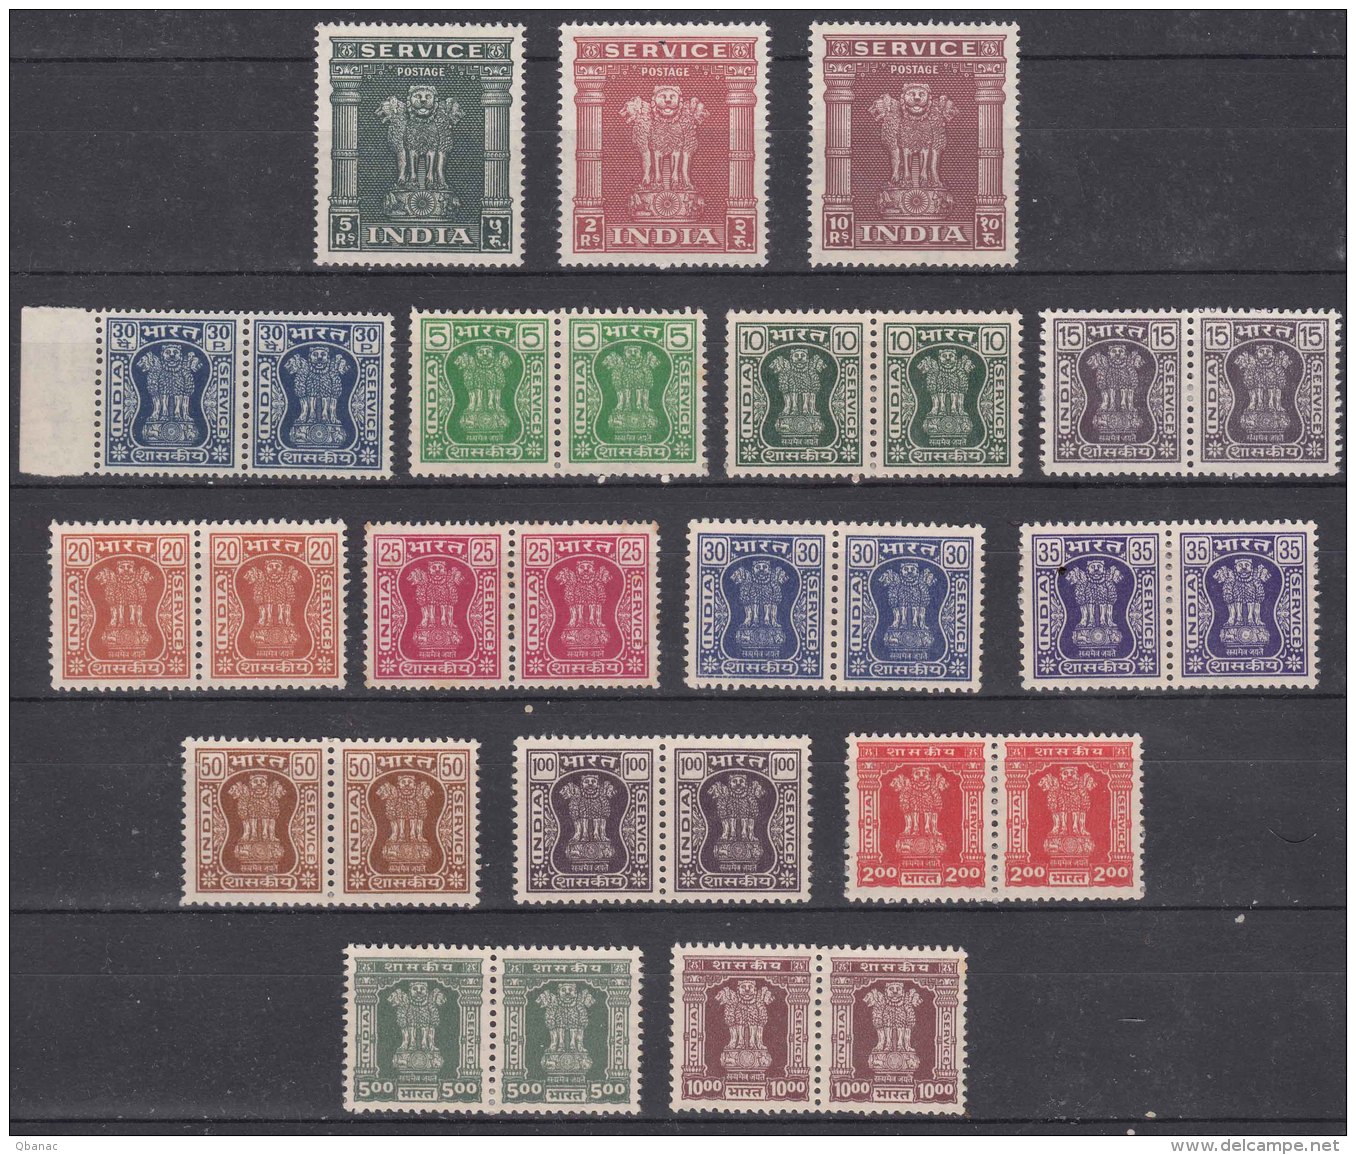 India Porto Postage Due, Dienstmarken Lot, Mixed Mint Never Hinged With Gum Or Without Gum - Timbres De Service